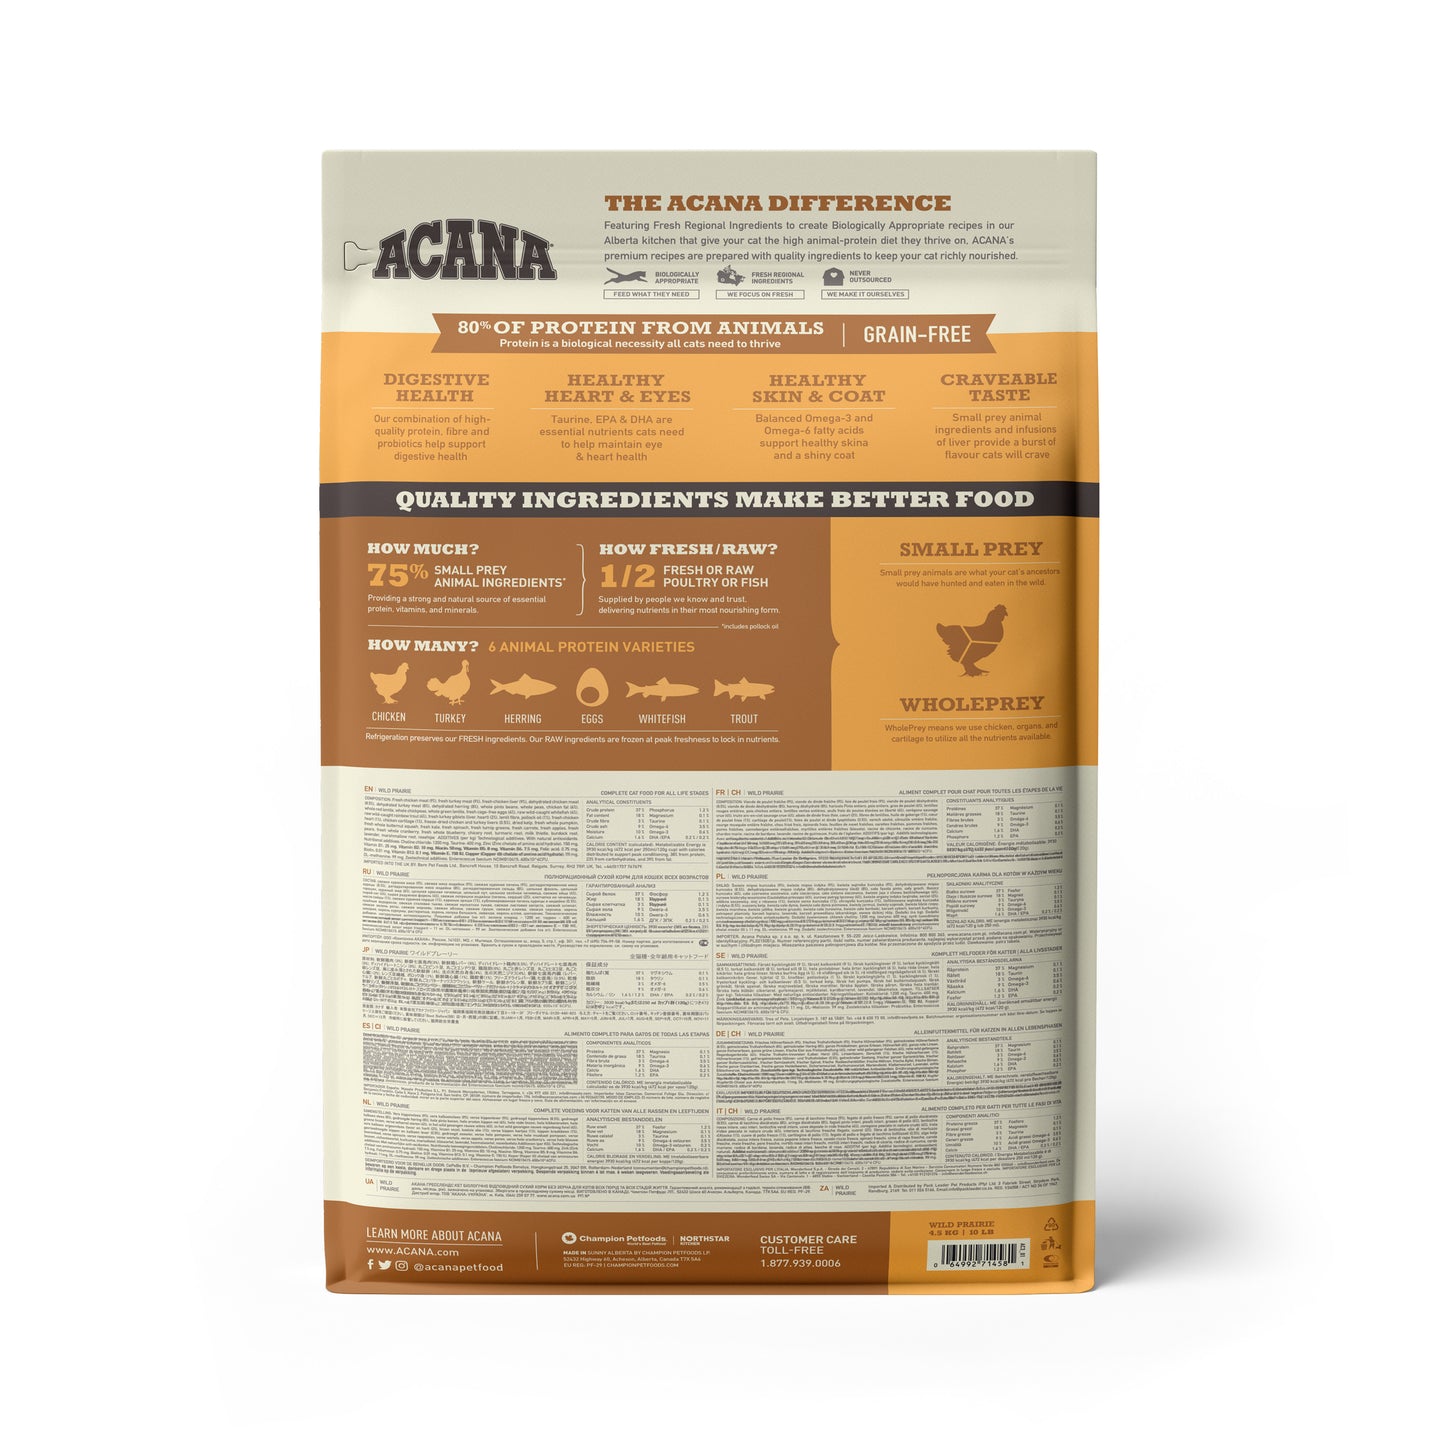 [EXTRA 5% OFF + FREE 340g of Kibbles] ACANA Regionals Wild Prairie Dry Cat Food (2 Sizes)